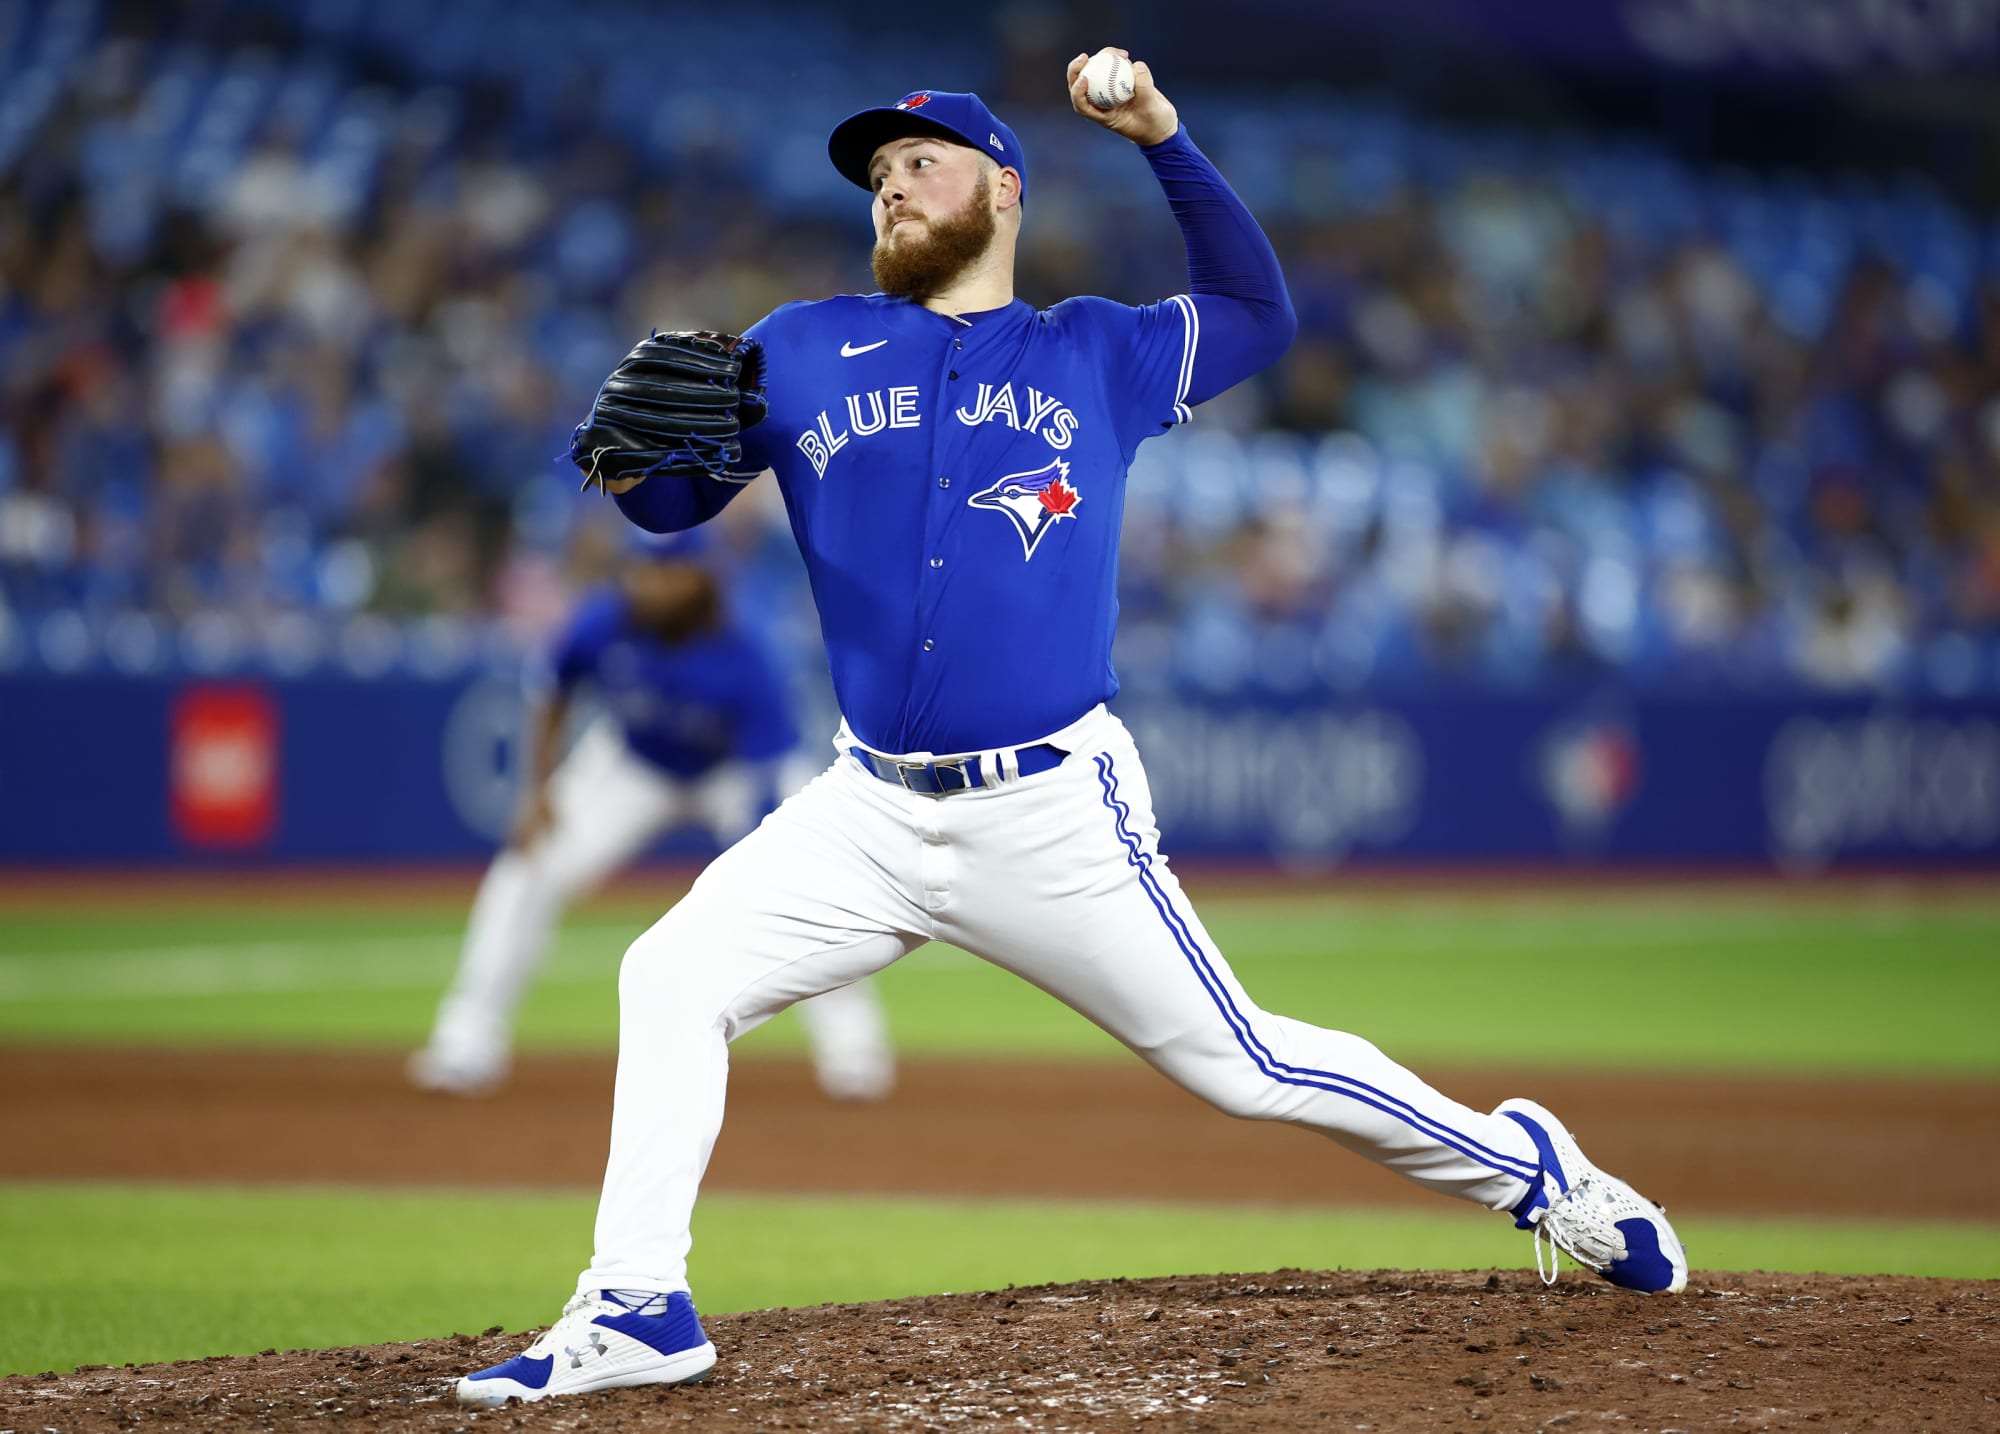 Blue Jays Time to consider shaking things up in the bullpen